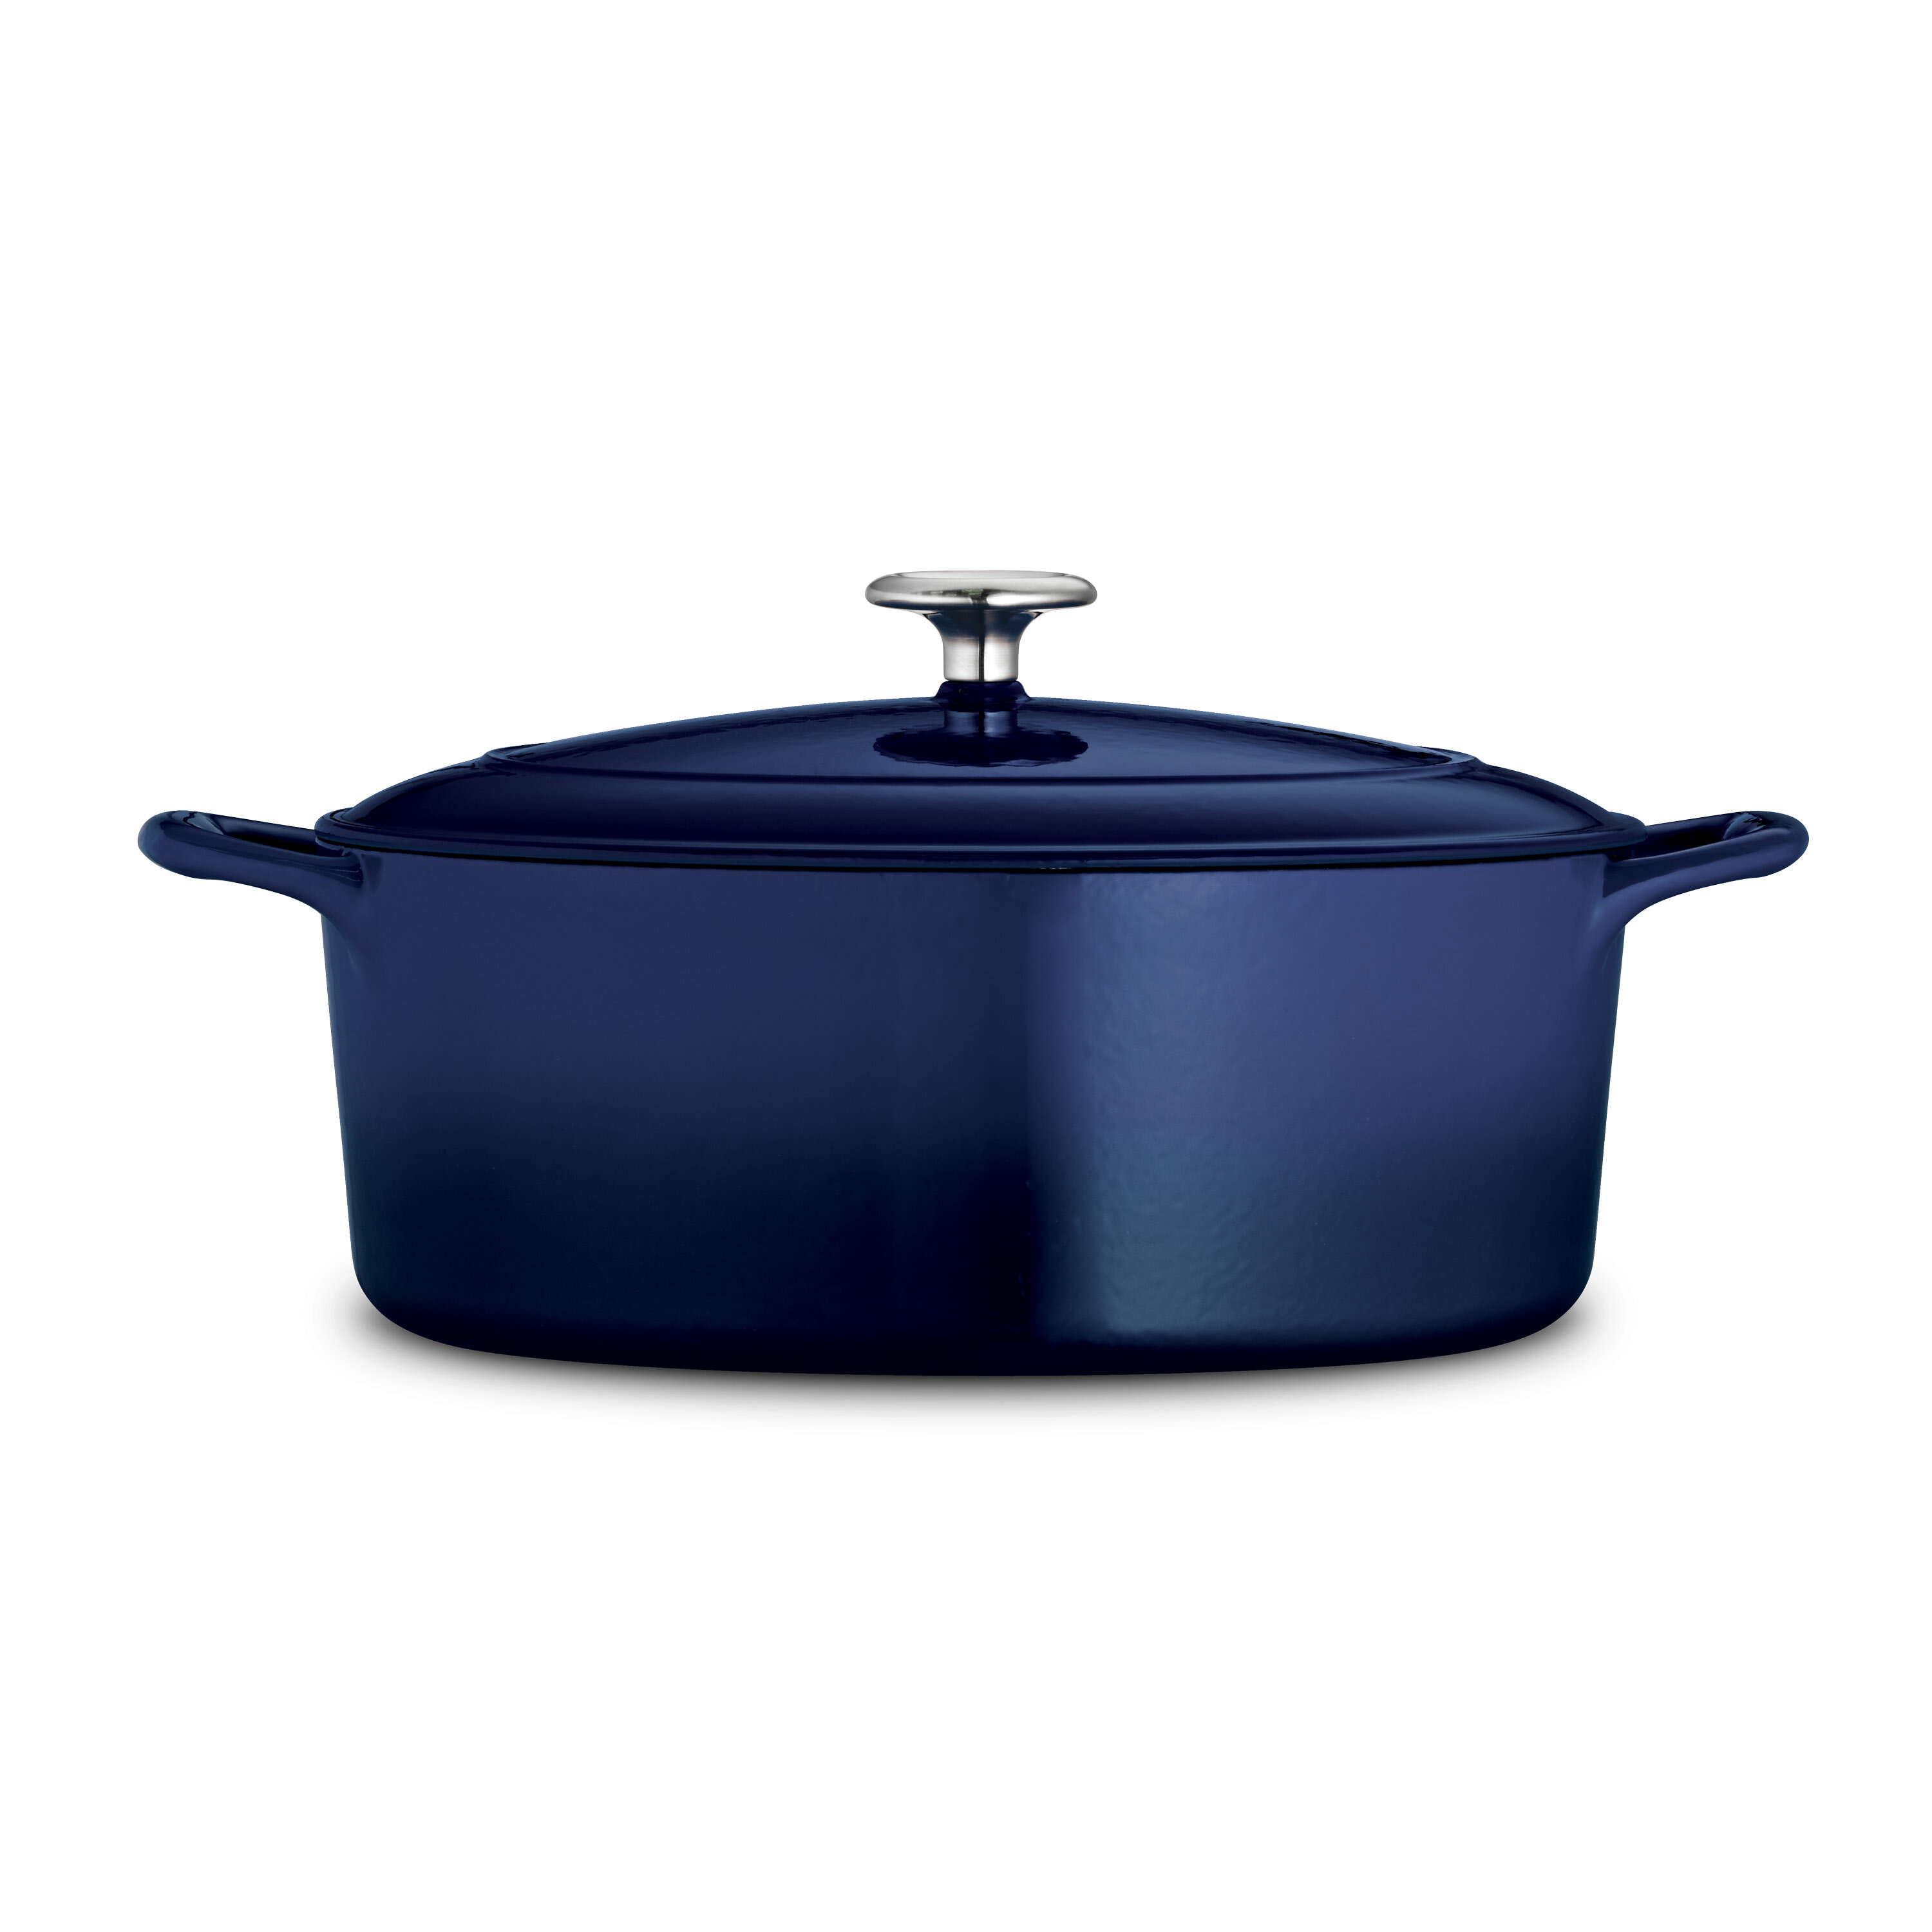 Tramontina 12 Enameled Cast Iron Covered Casserole Dish (Assorted Colors)